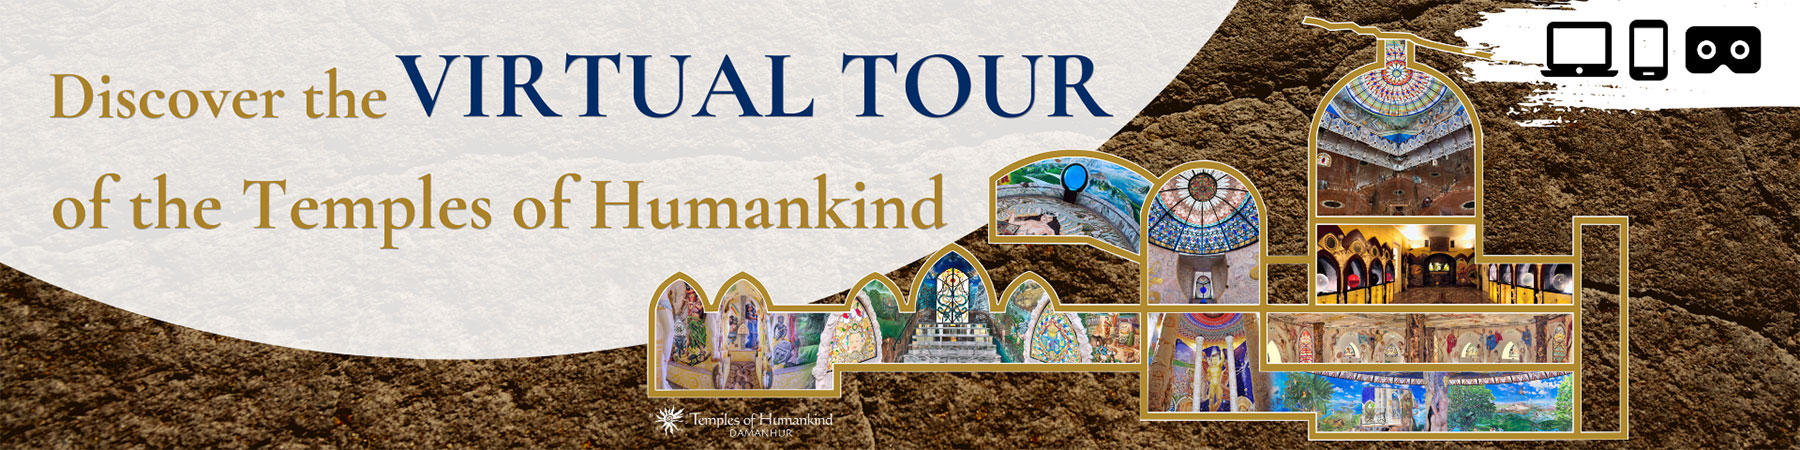 Discover the Virtual Tour of the Temples of Humankind